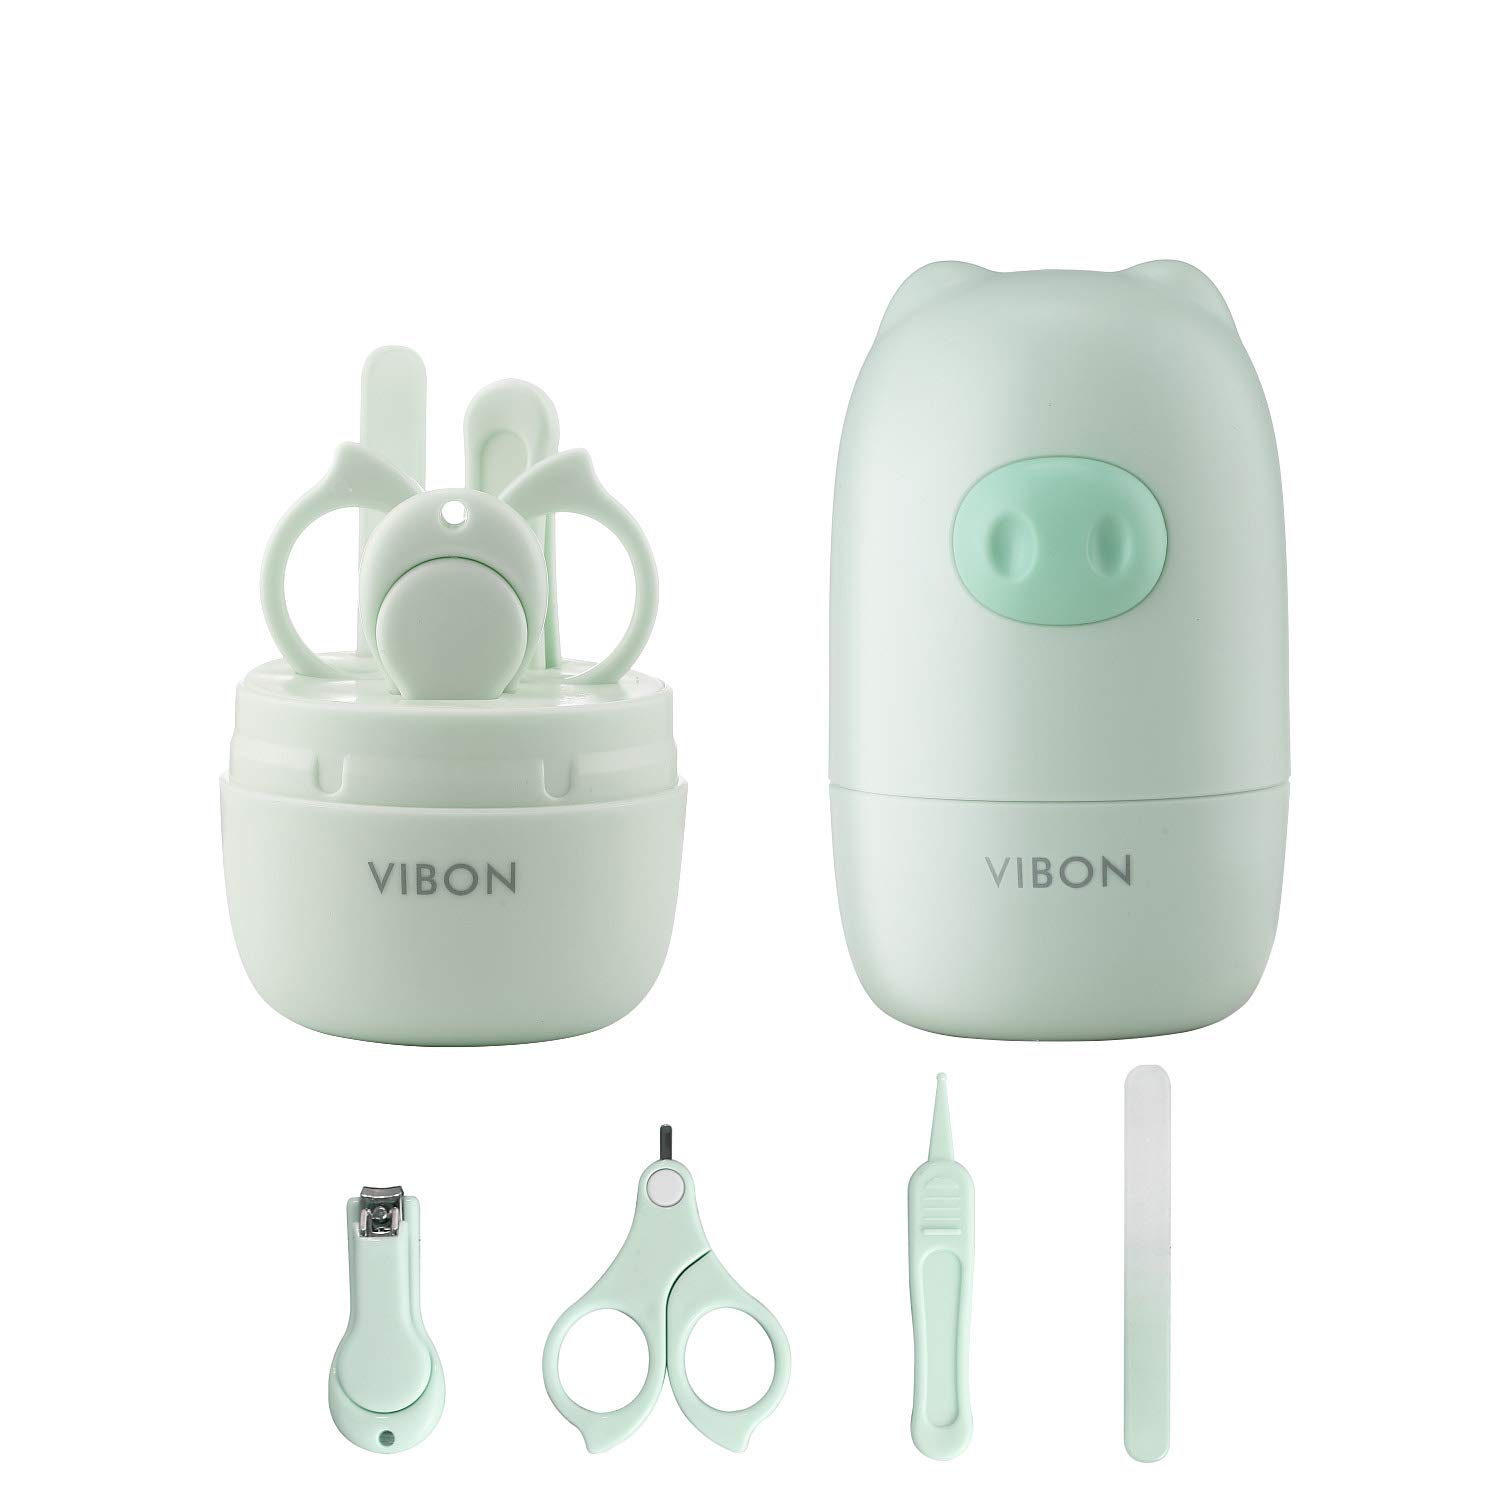 VIBON Apple Green Pig Shape Baby Manicure Kit,Safe Baby Bear Nail Clipper,Scissors,Tweezers and Nail File(4 Pcs),Baby Nail Care Set for Newborn,Infant,Toddler,Kids